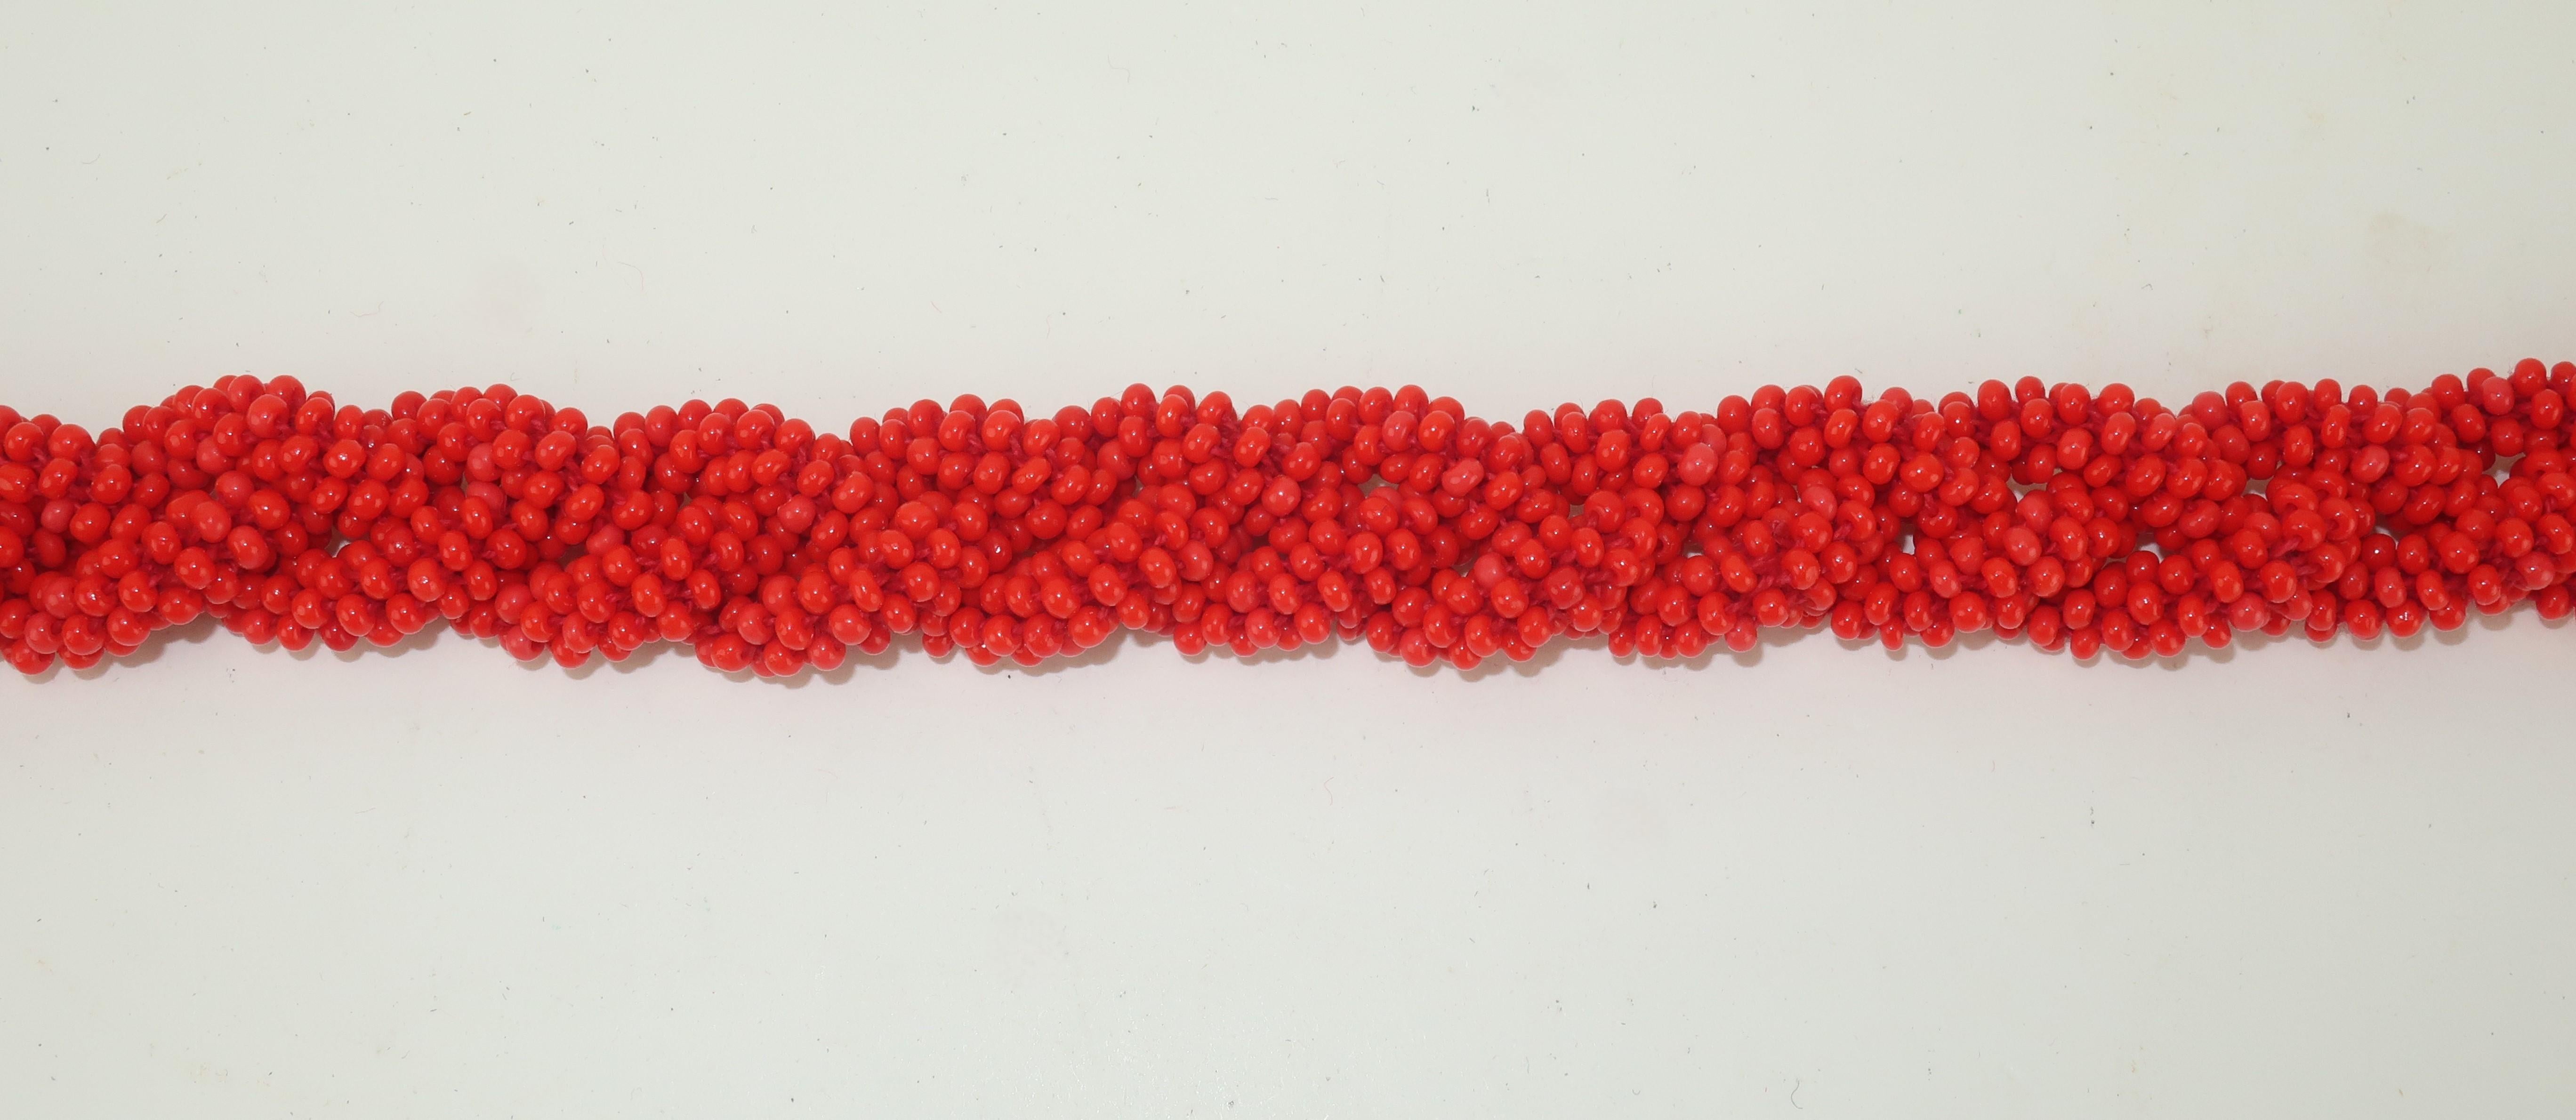 Vintage Coral Red Glass Bead Belt or Necklace For Sale 4